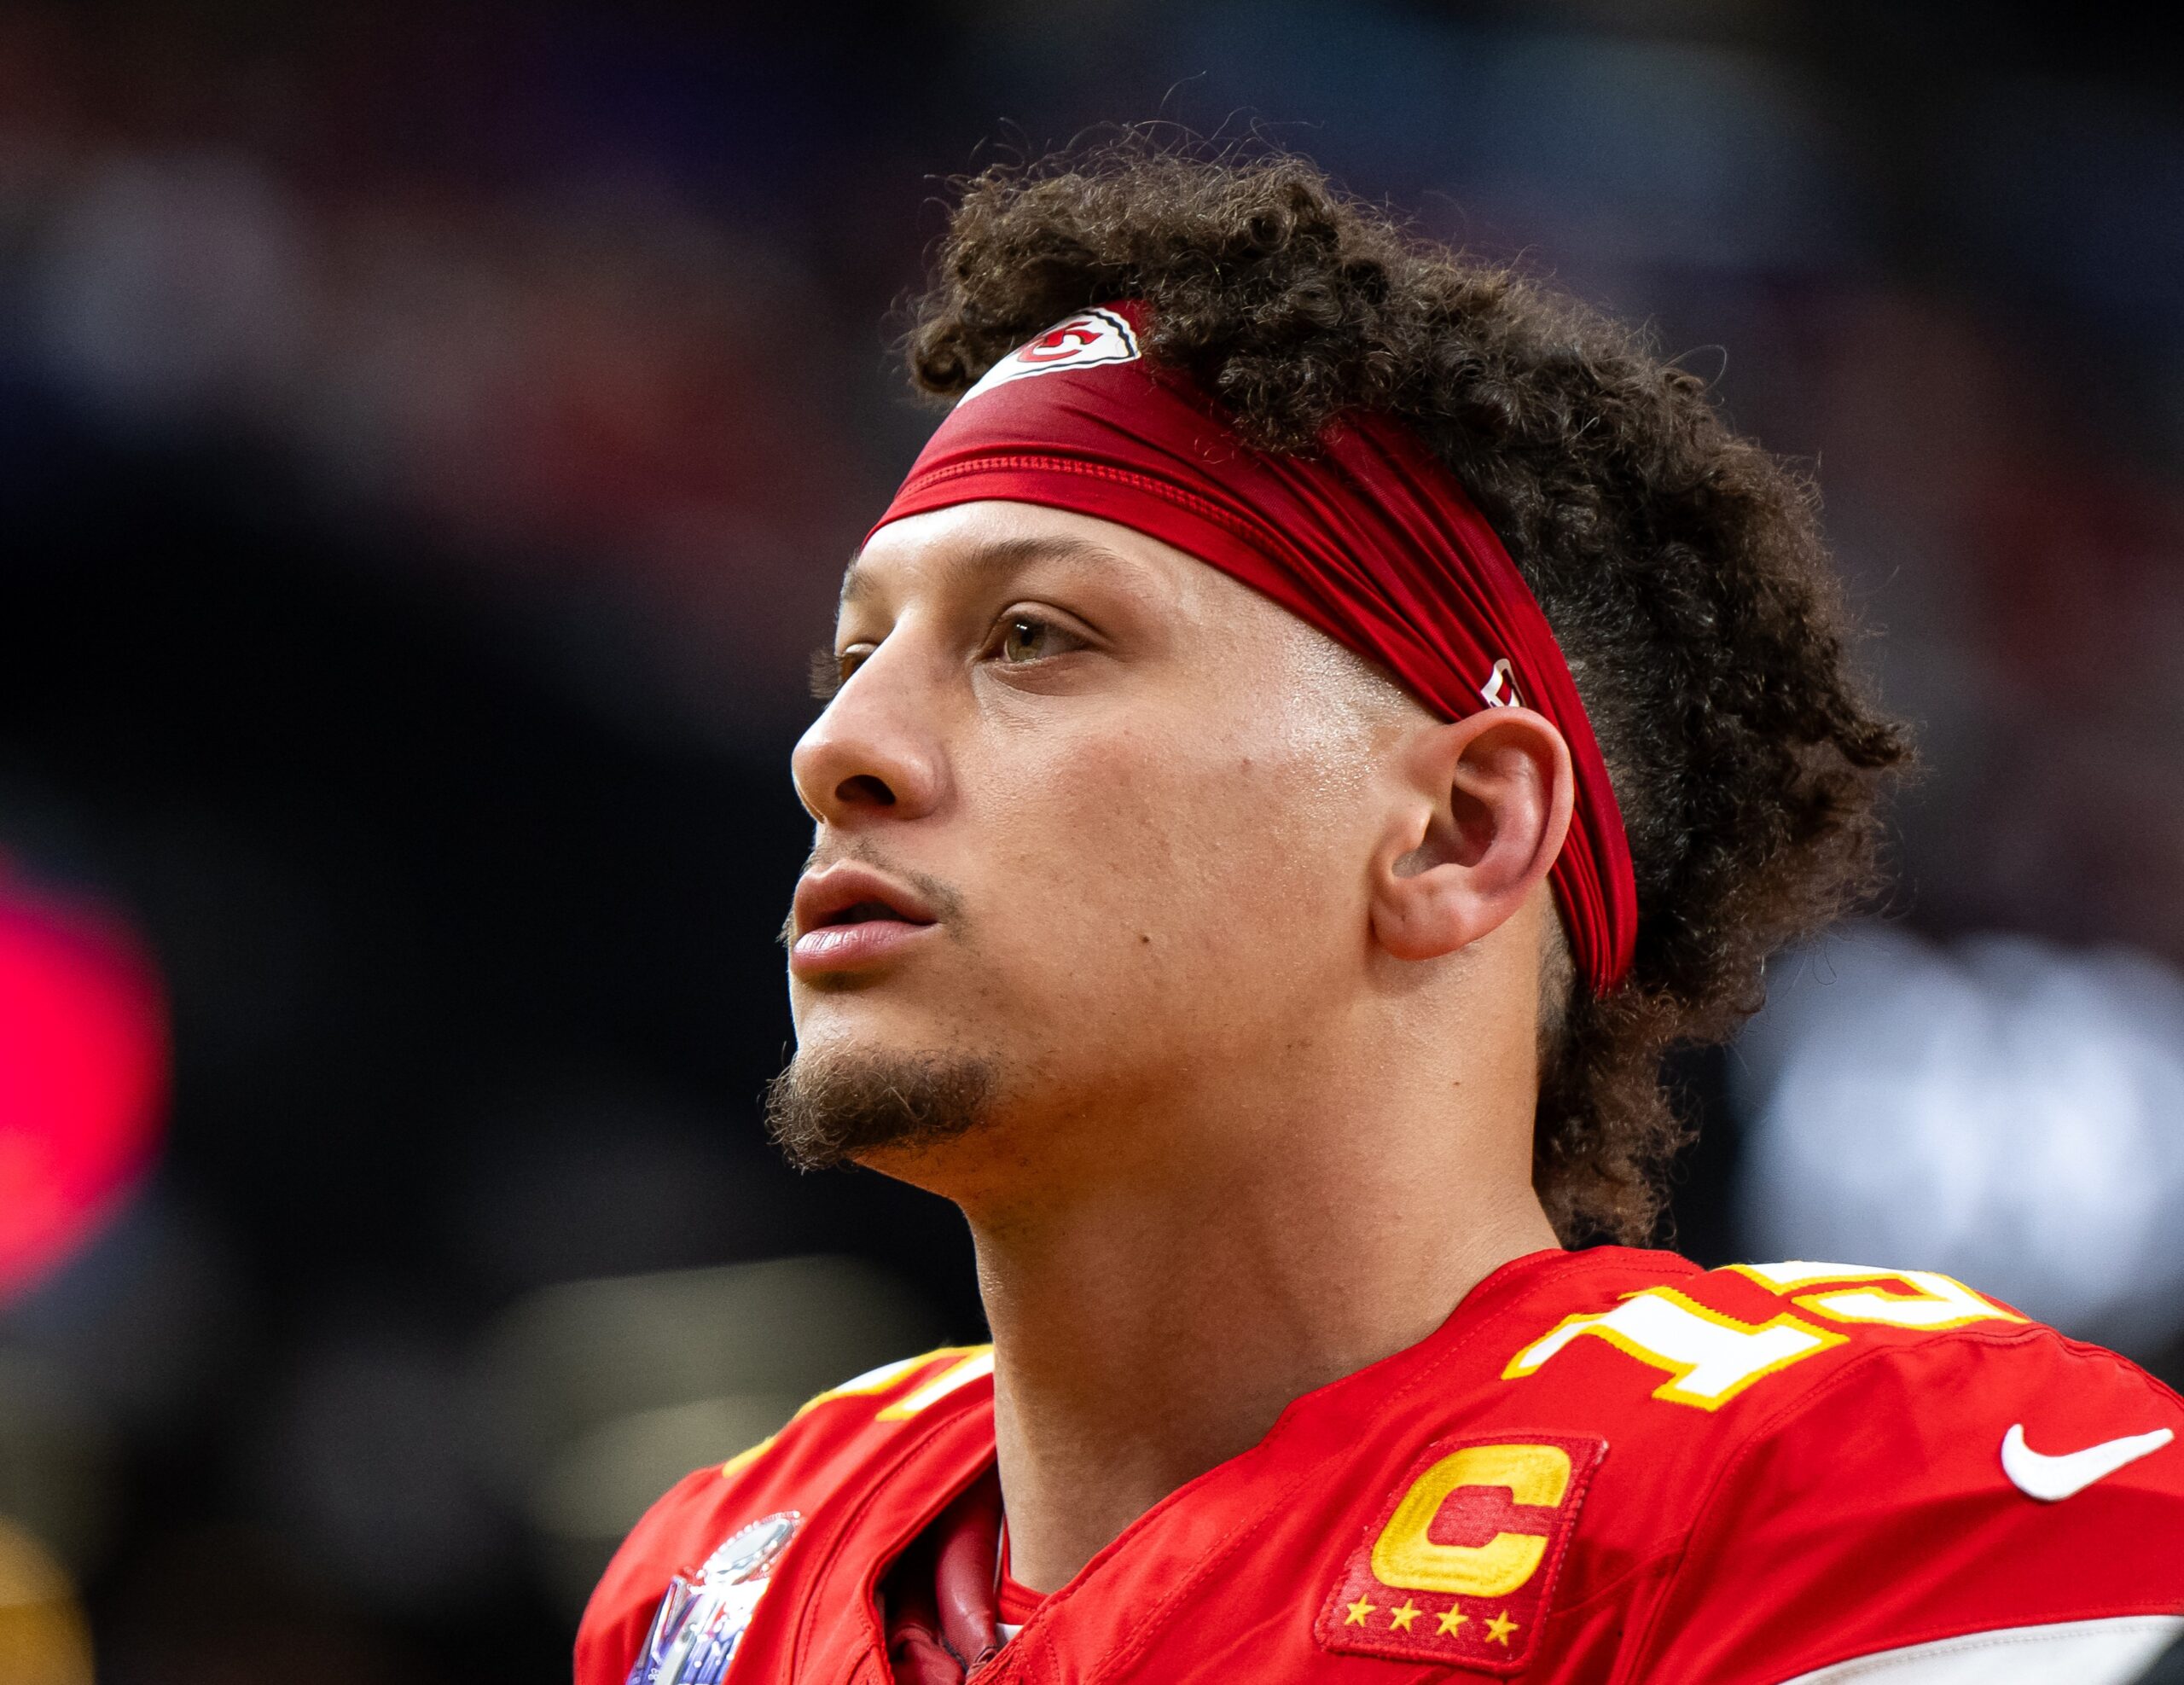 Mahomes is probably the most famous player in the sport